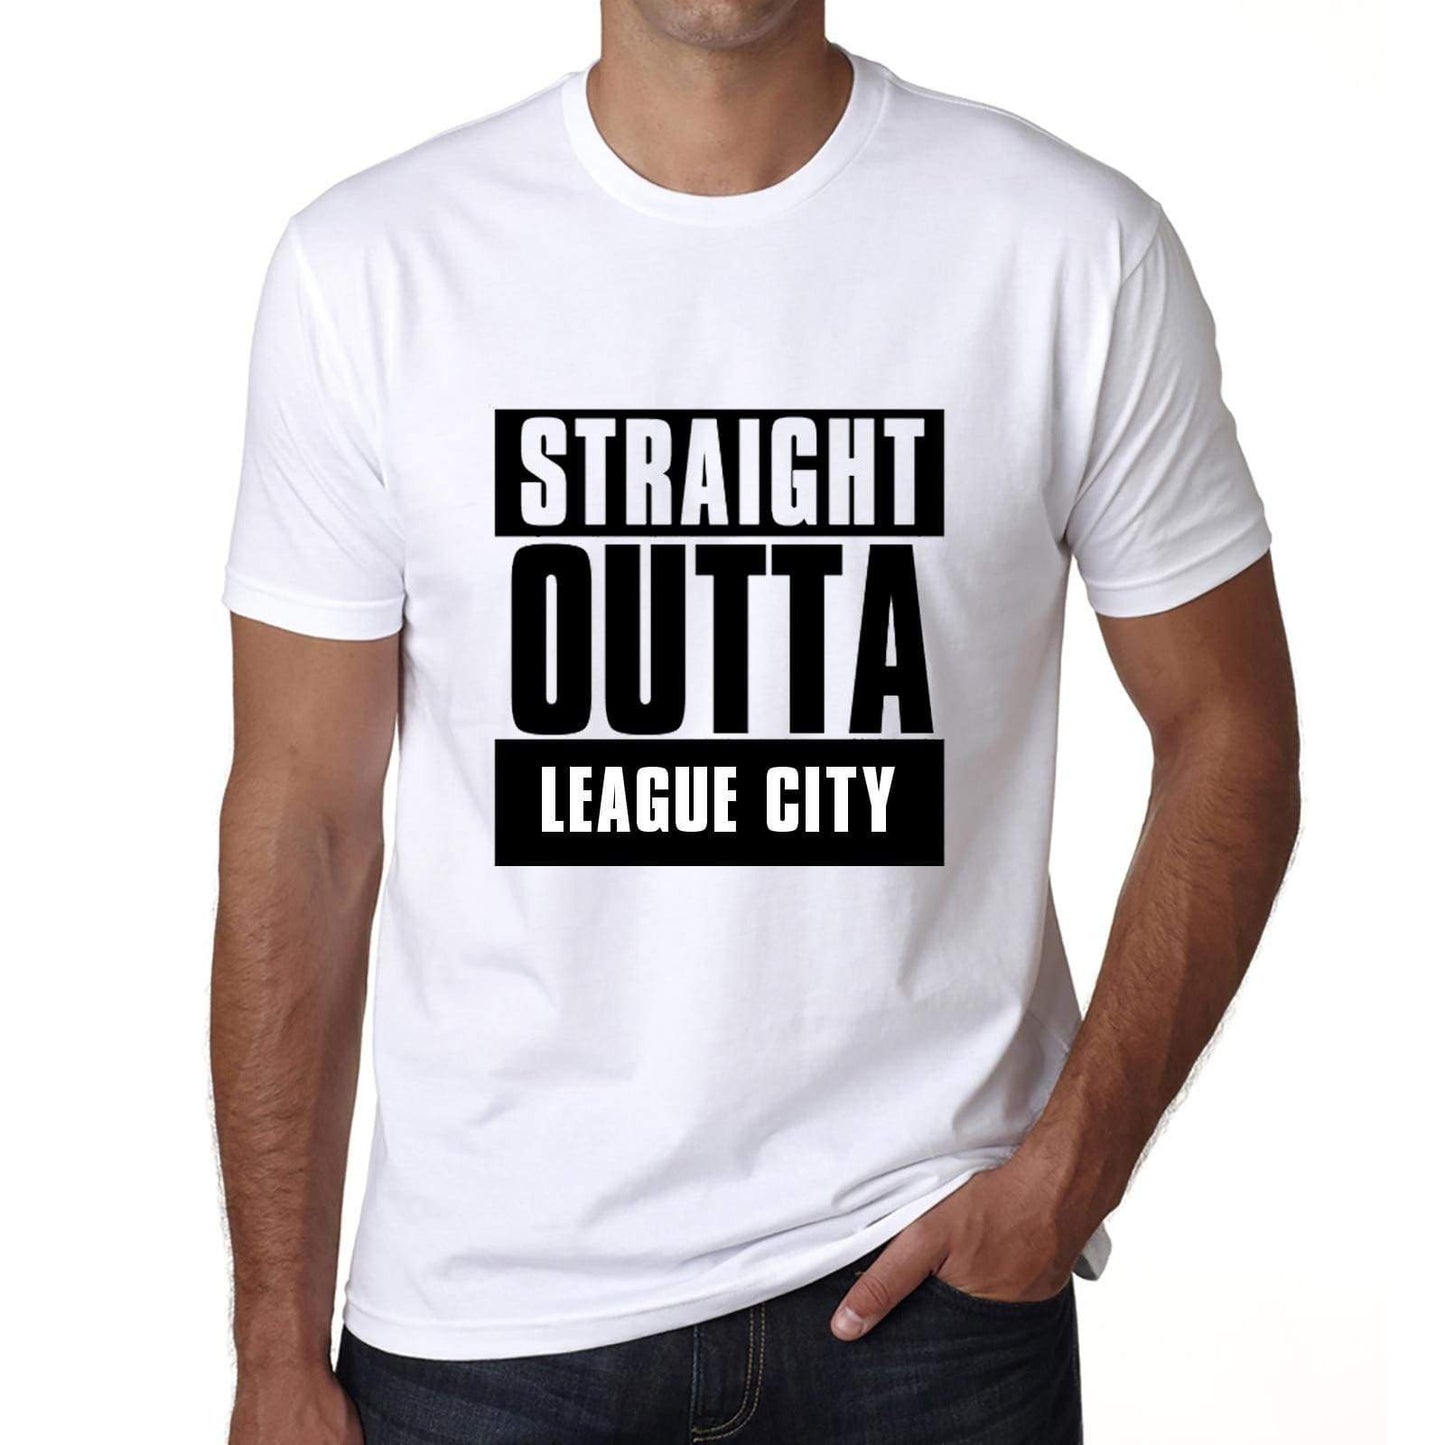 Straight Outta League City Mens Short Sleeve Round Neck T-Shirt 00027 - White / S - Casual